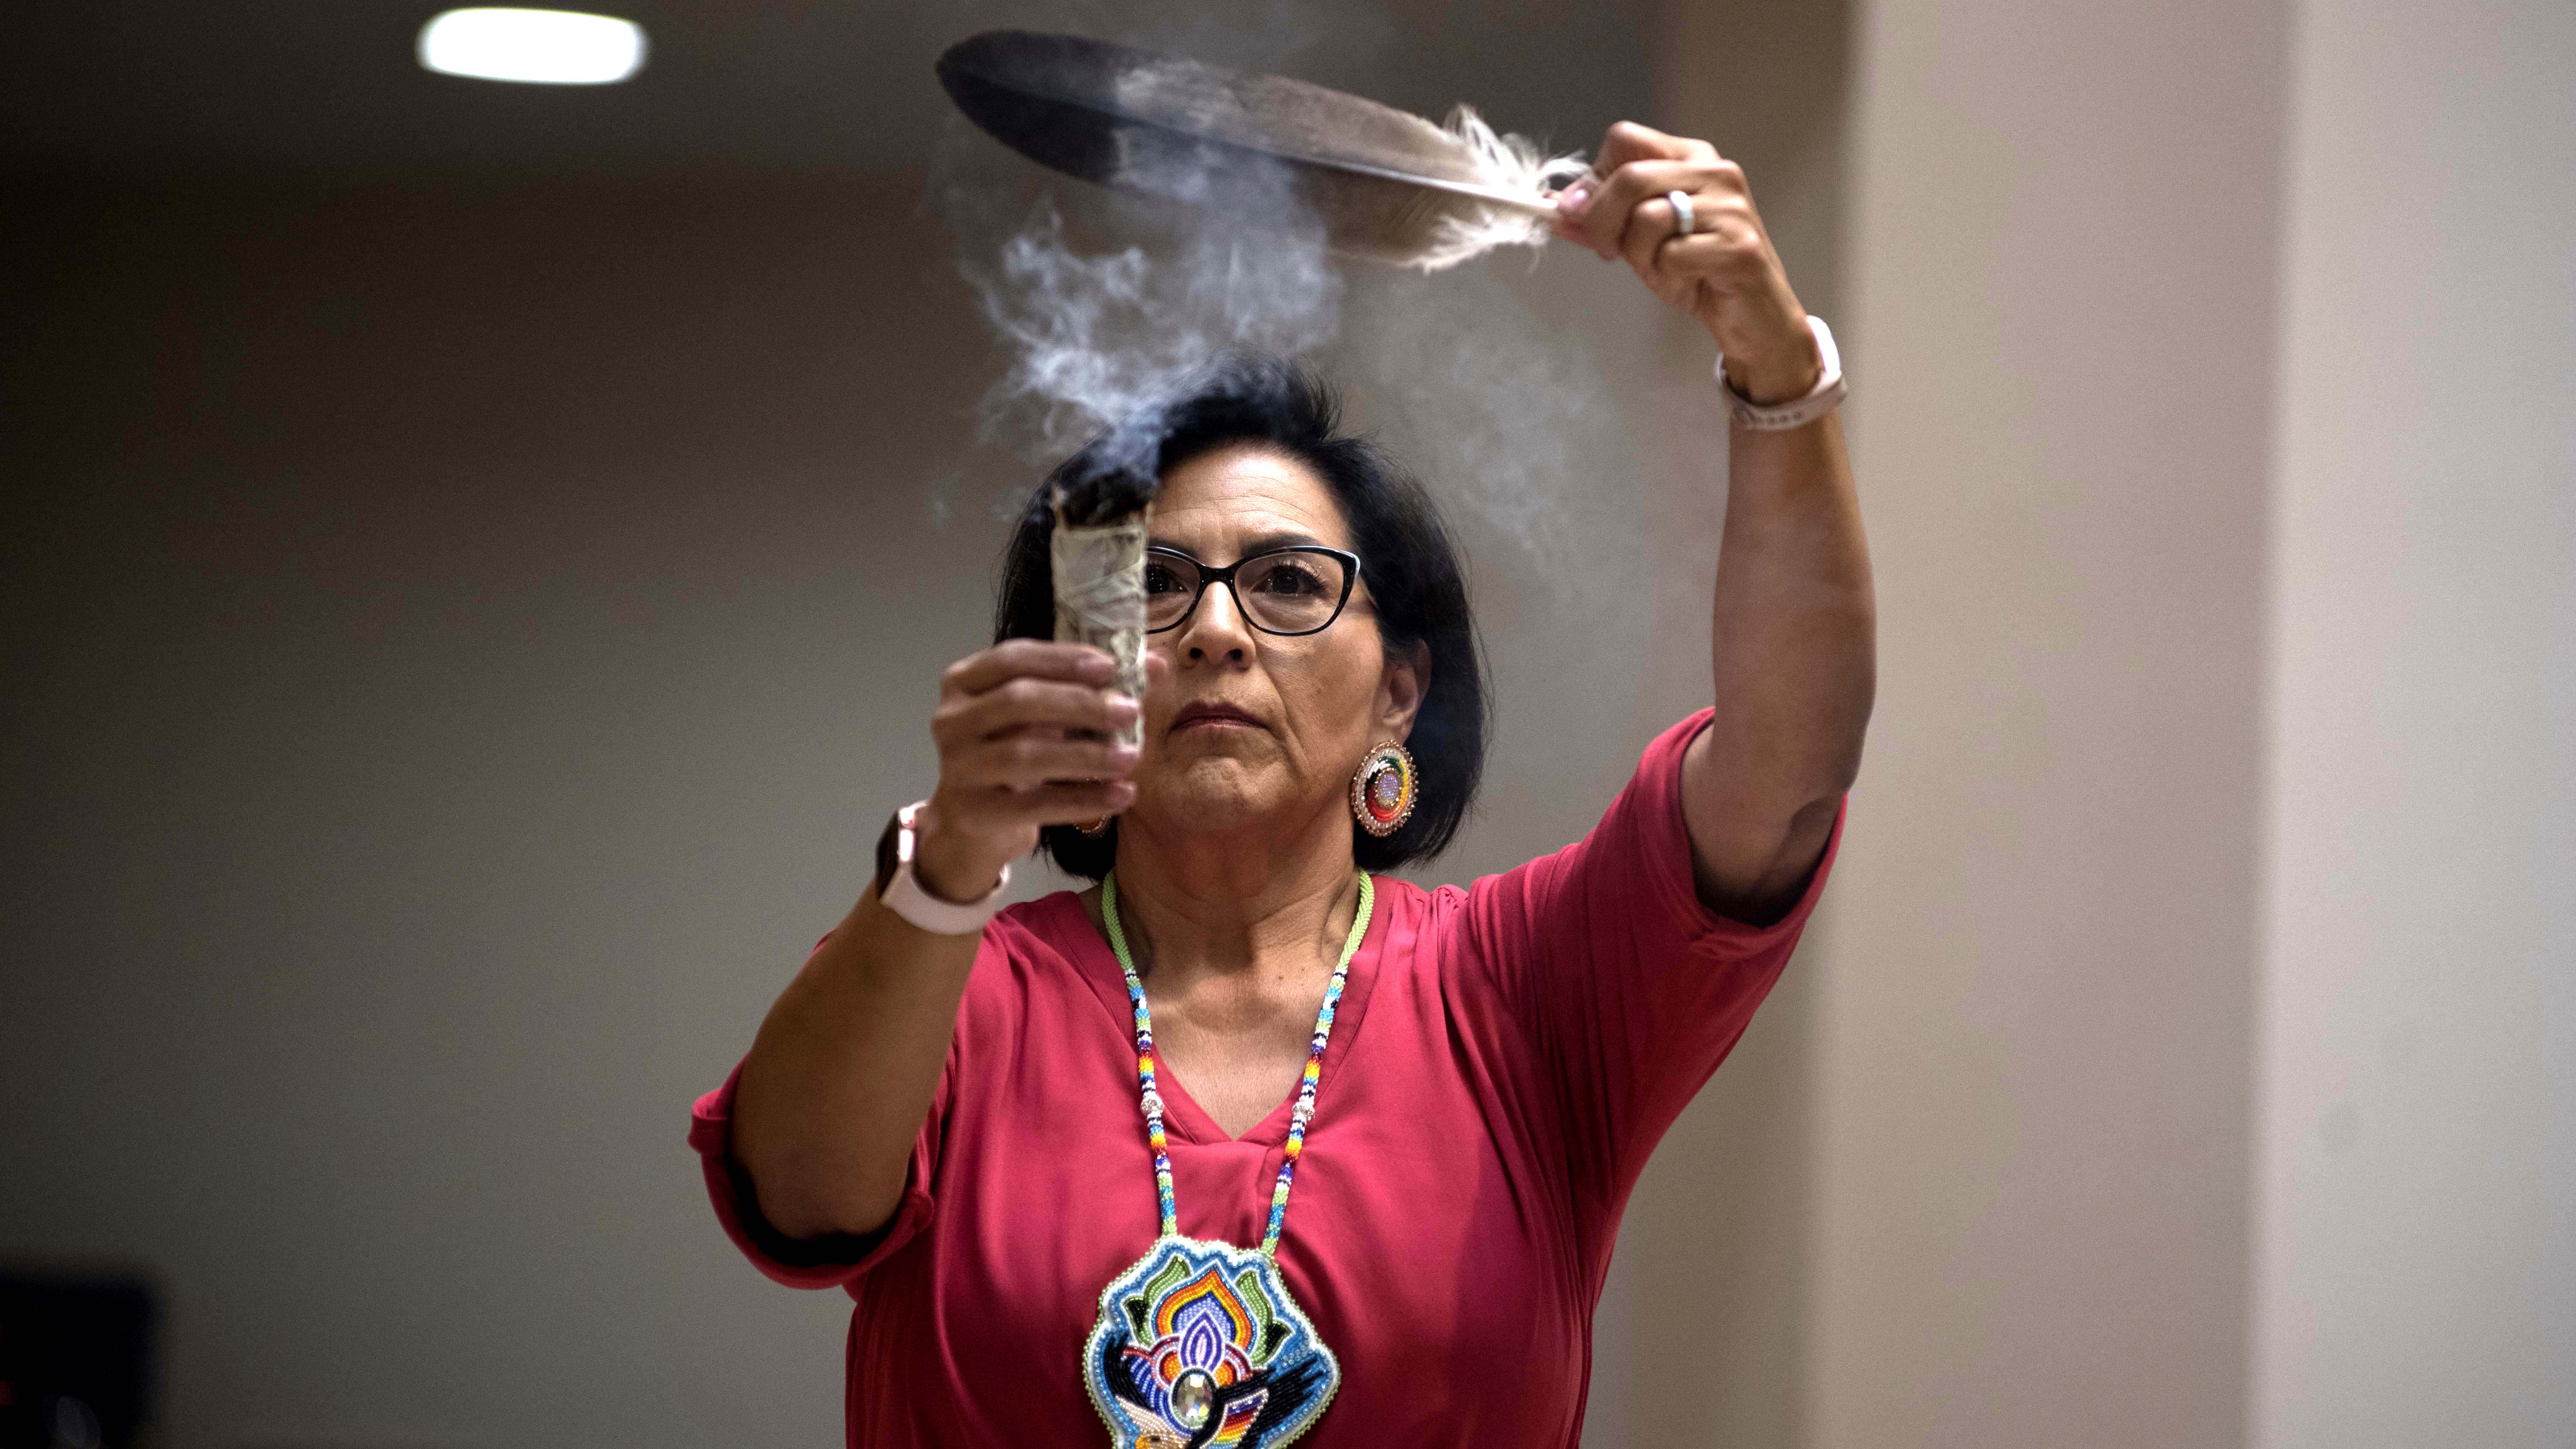 A member of the Native American community performs a smudging blessing.